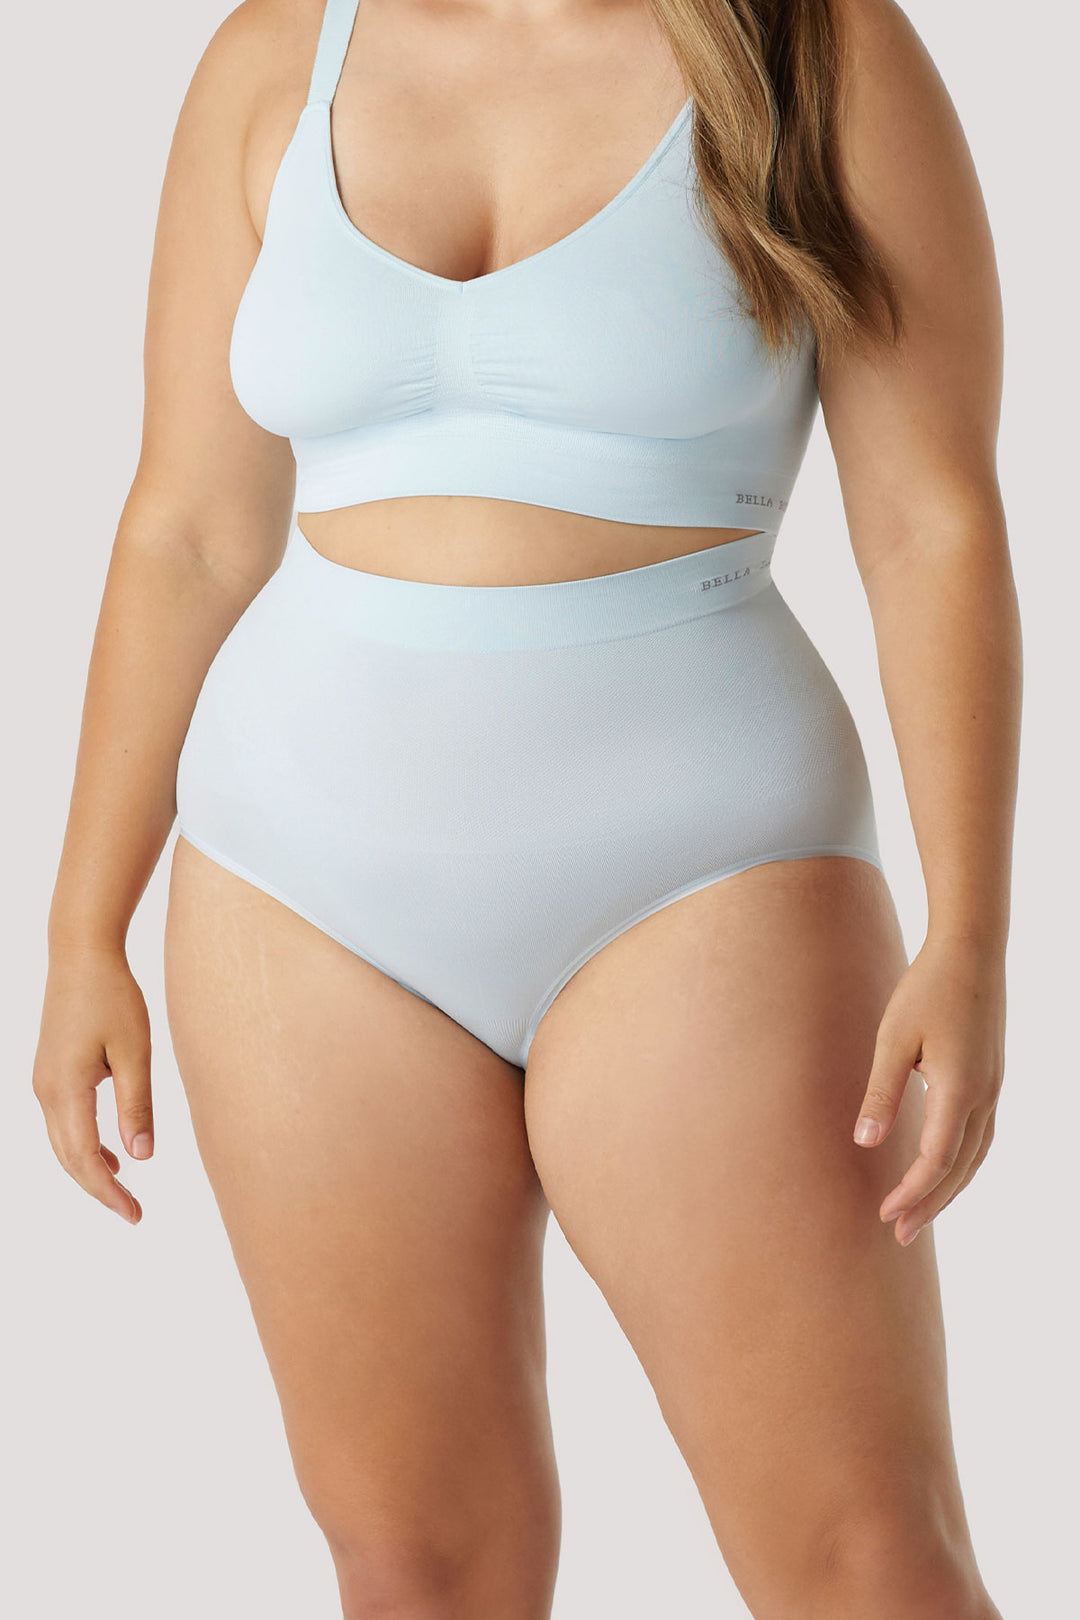 High Waist Smoothing and Firming, Full-Coverage Underwear 2 pack | Bella Bodies UK | Ice Blue | Front